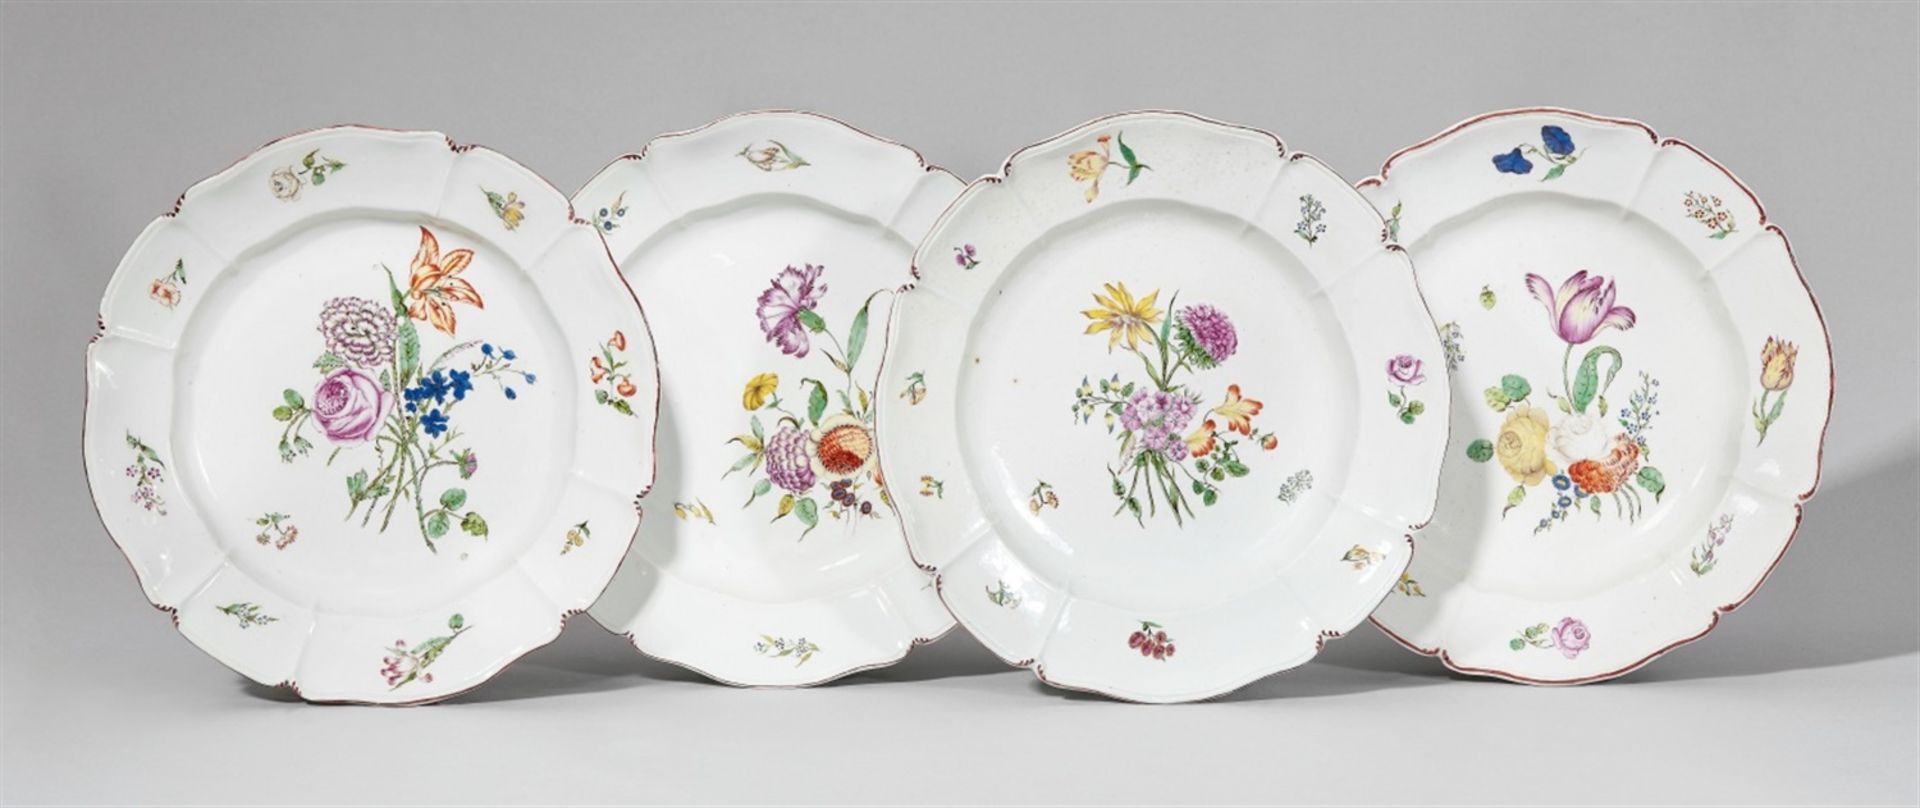 Four Nymphenburg porcelain plates with bouquetsScalloped plate with scattered flowers. Impressed